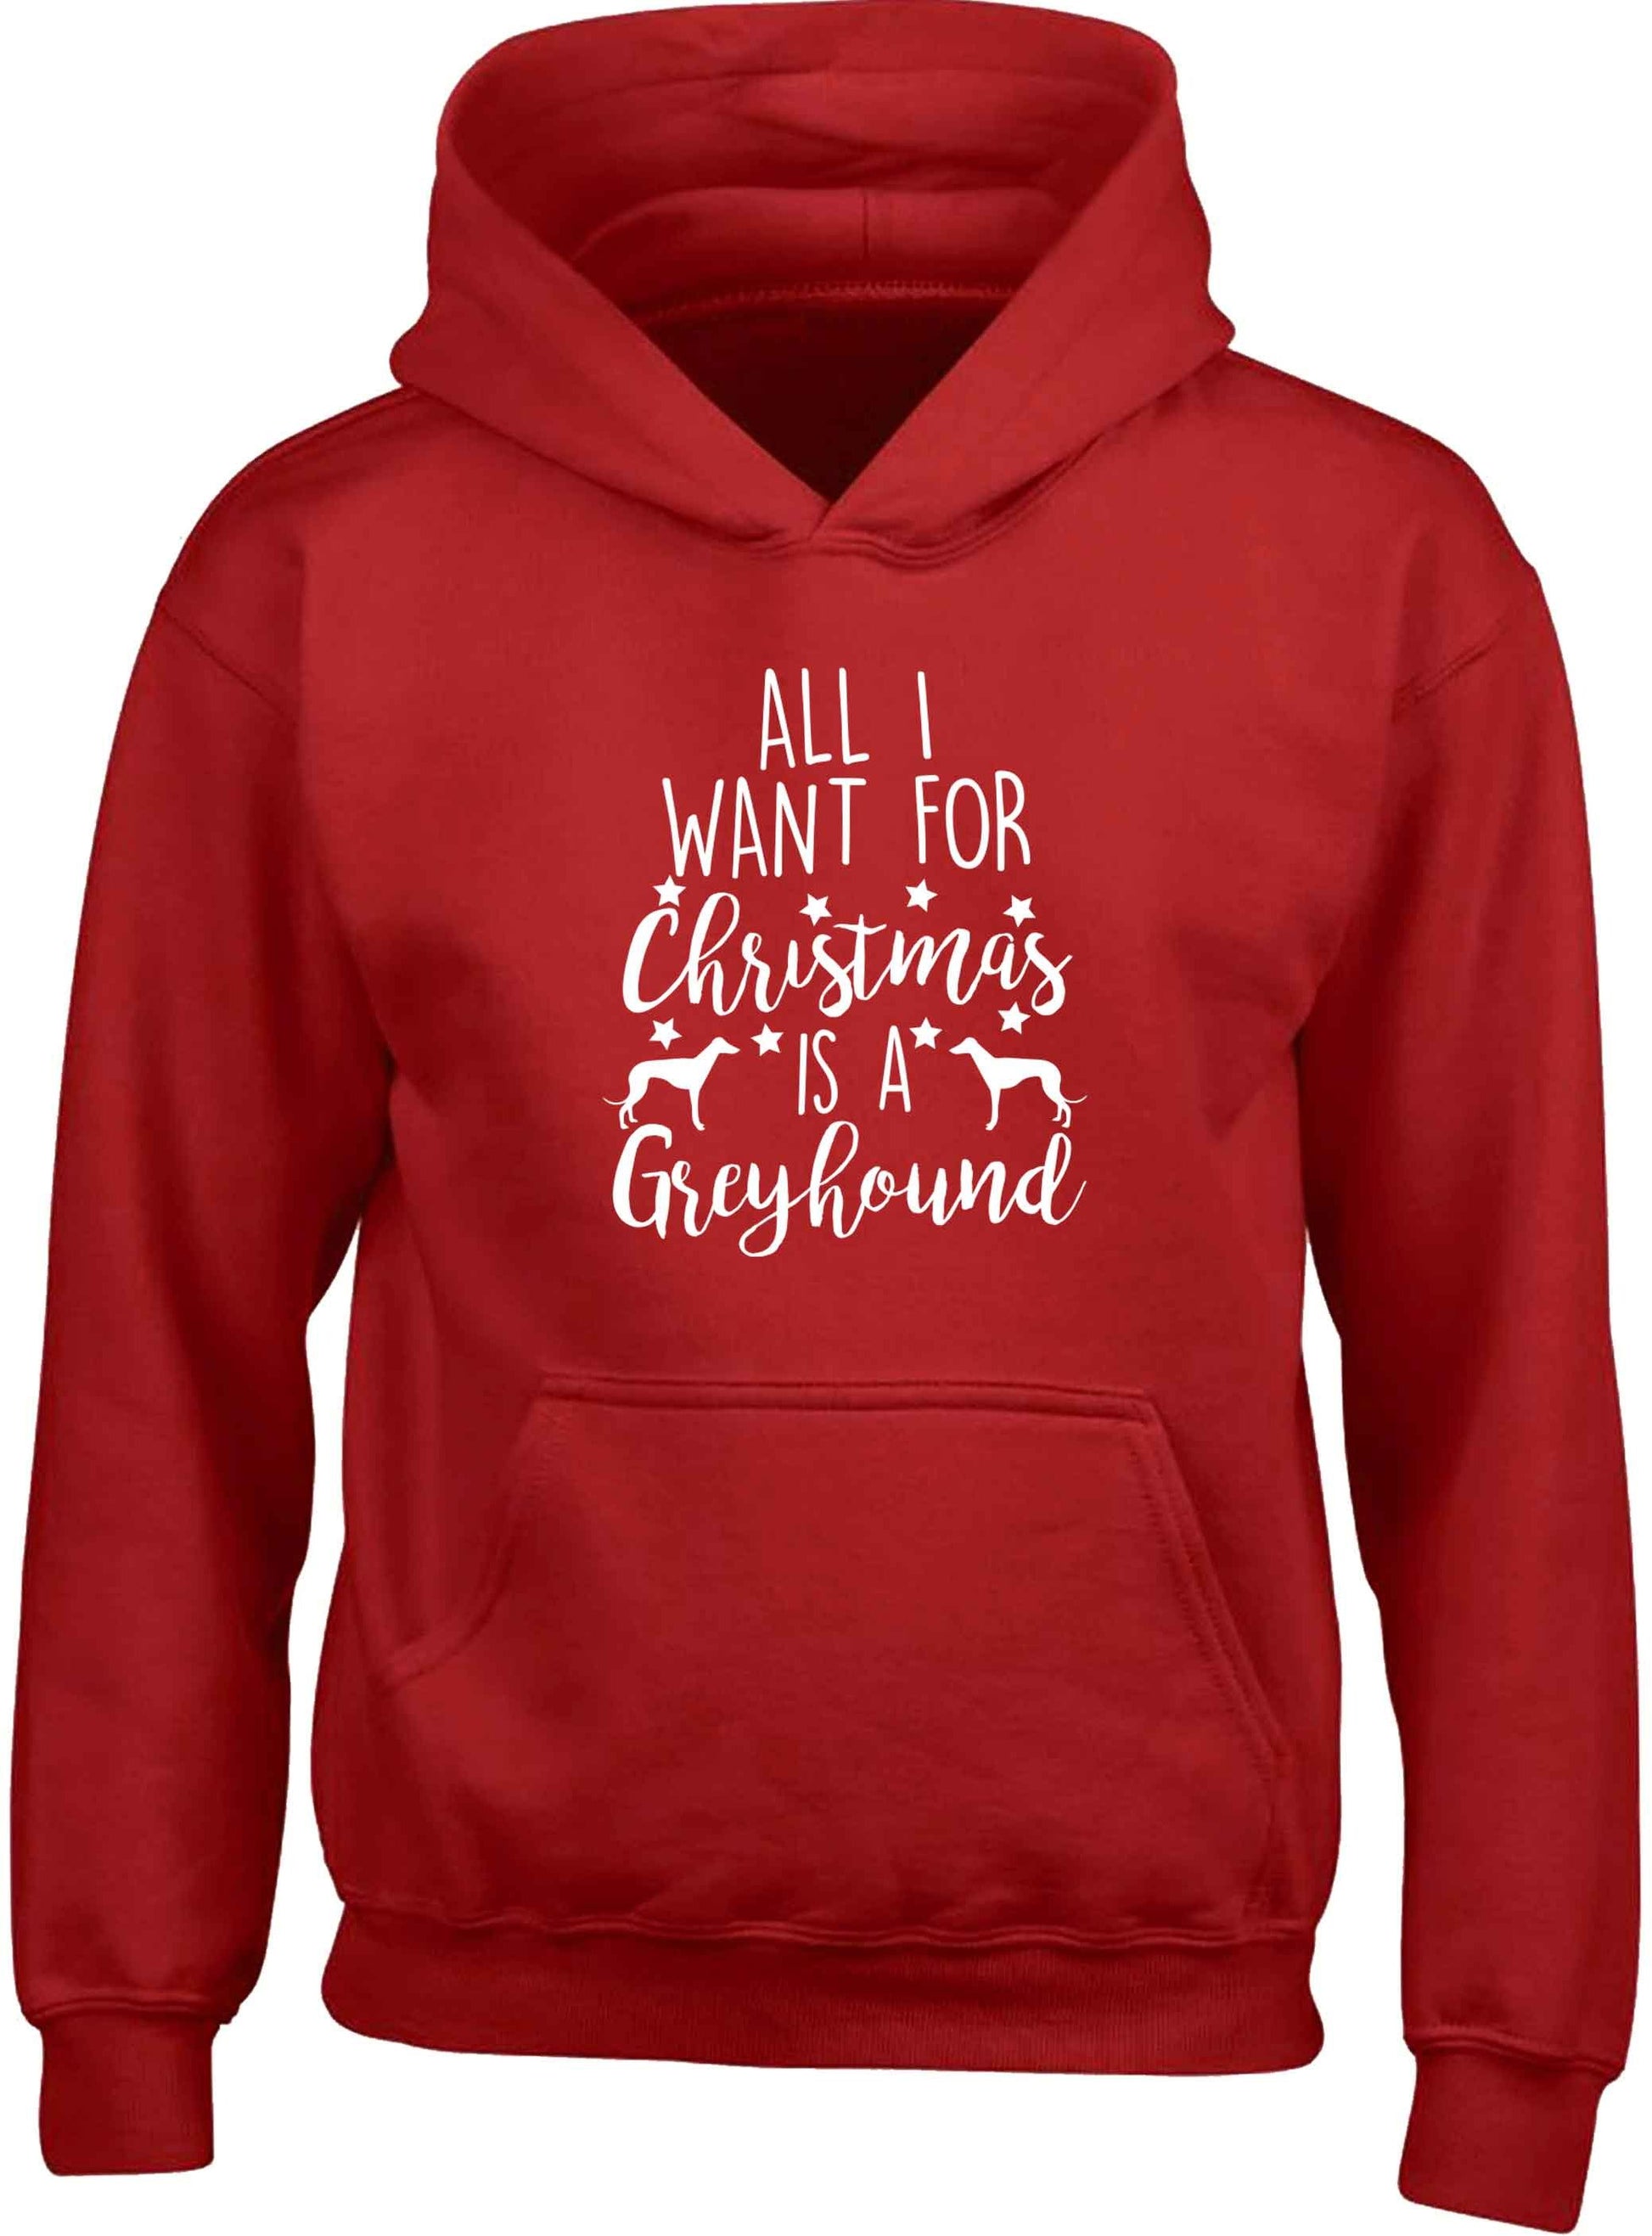 All I want for Christmas is a greyhound children's red hoodie 12-13 Years